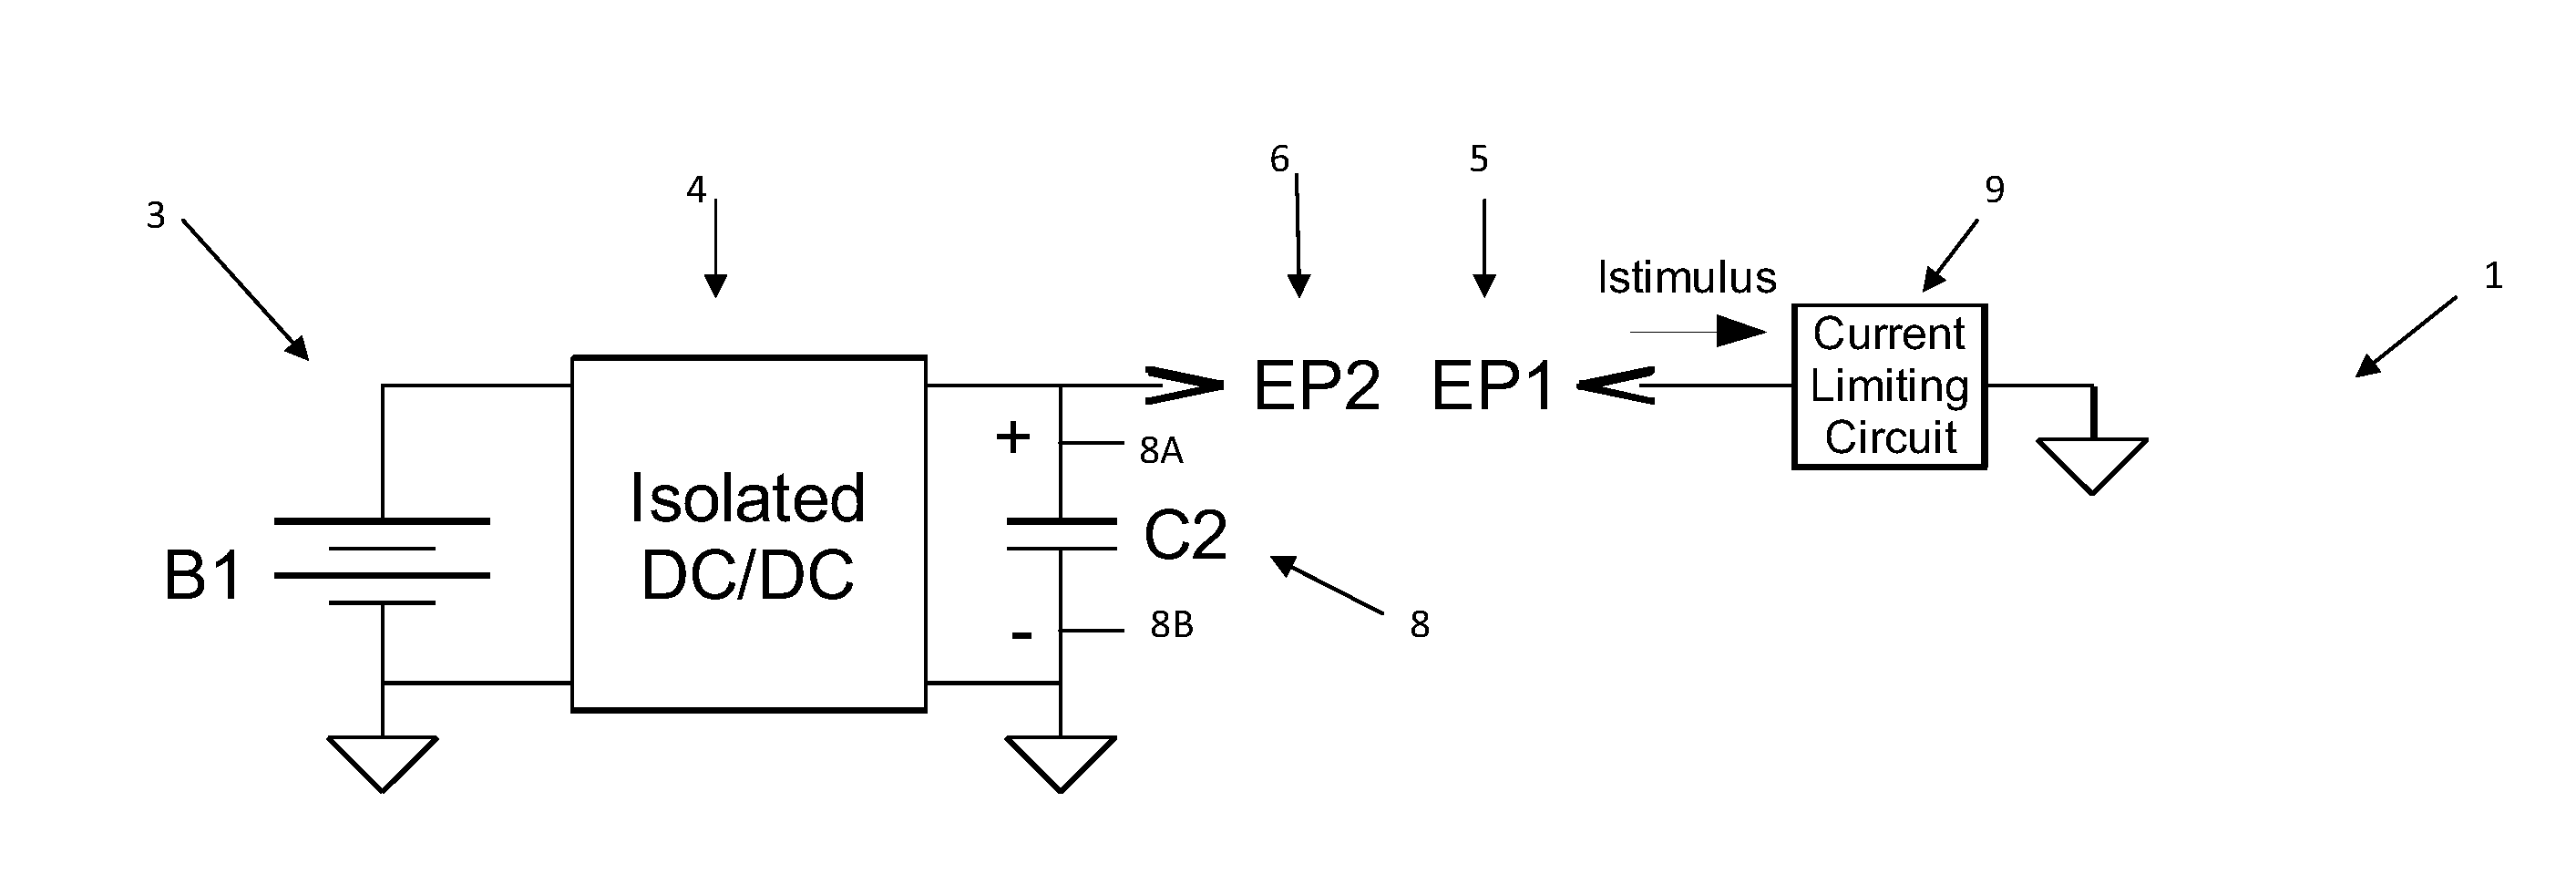 High voltage circuit for electrical stimulation